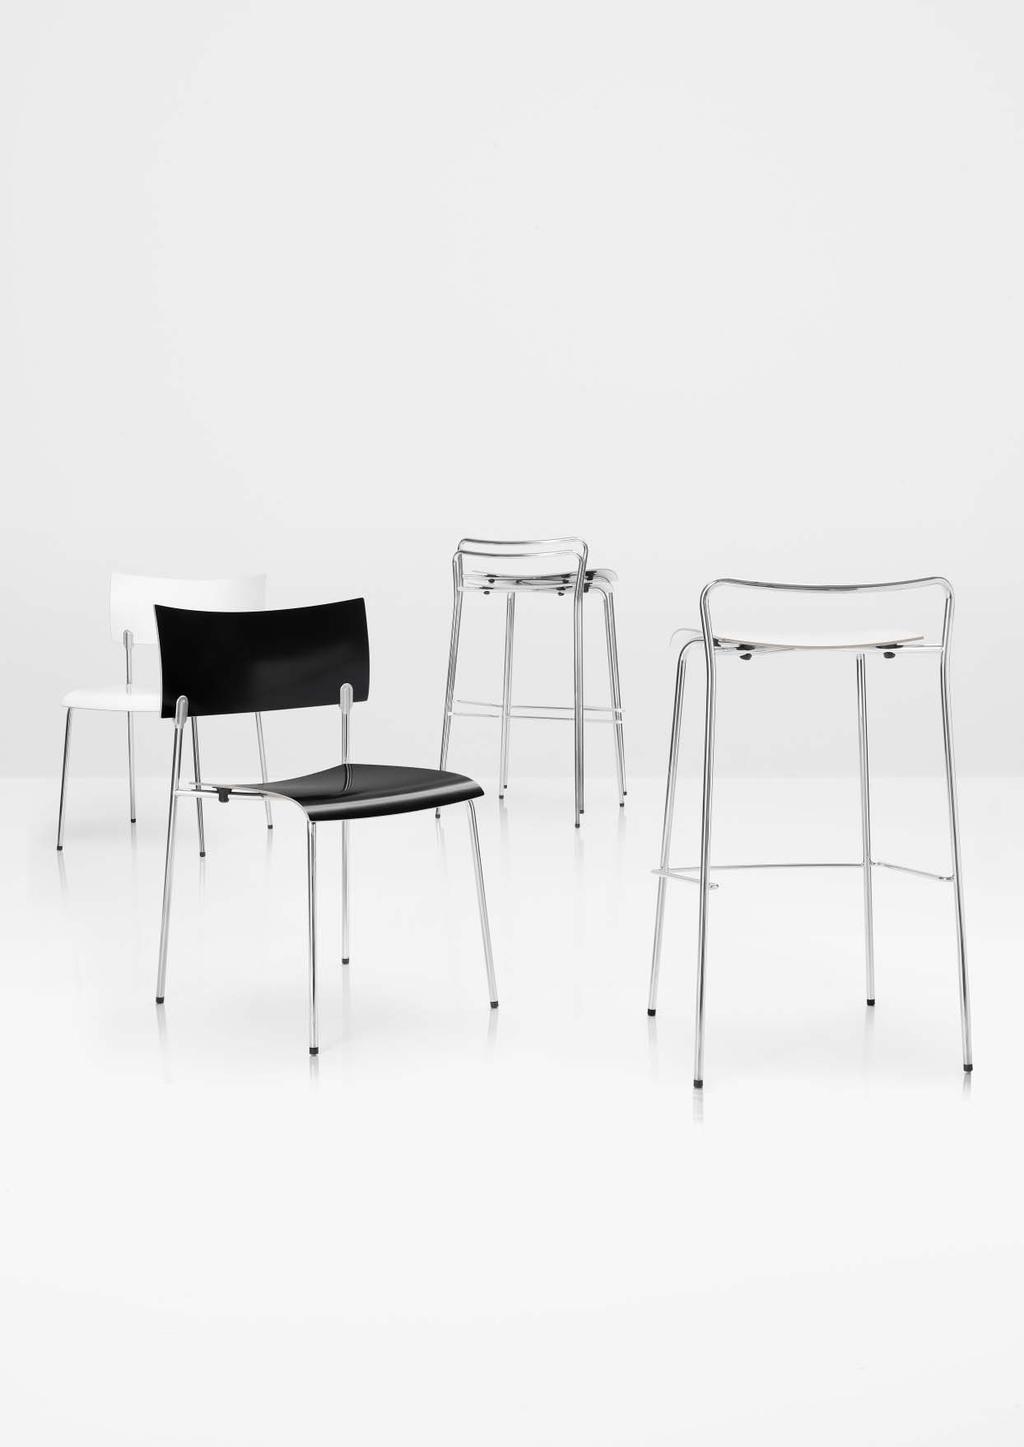 CHIP DESIGN ANTTI KOTILAINEN The extreme lightness and clean minimalistic shape of the CHIP chair attracts worldwide interest from professionals furnishing public spaces.